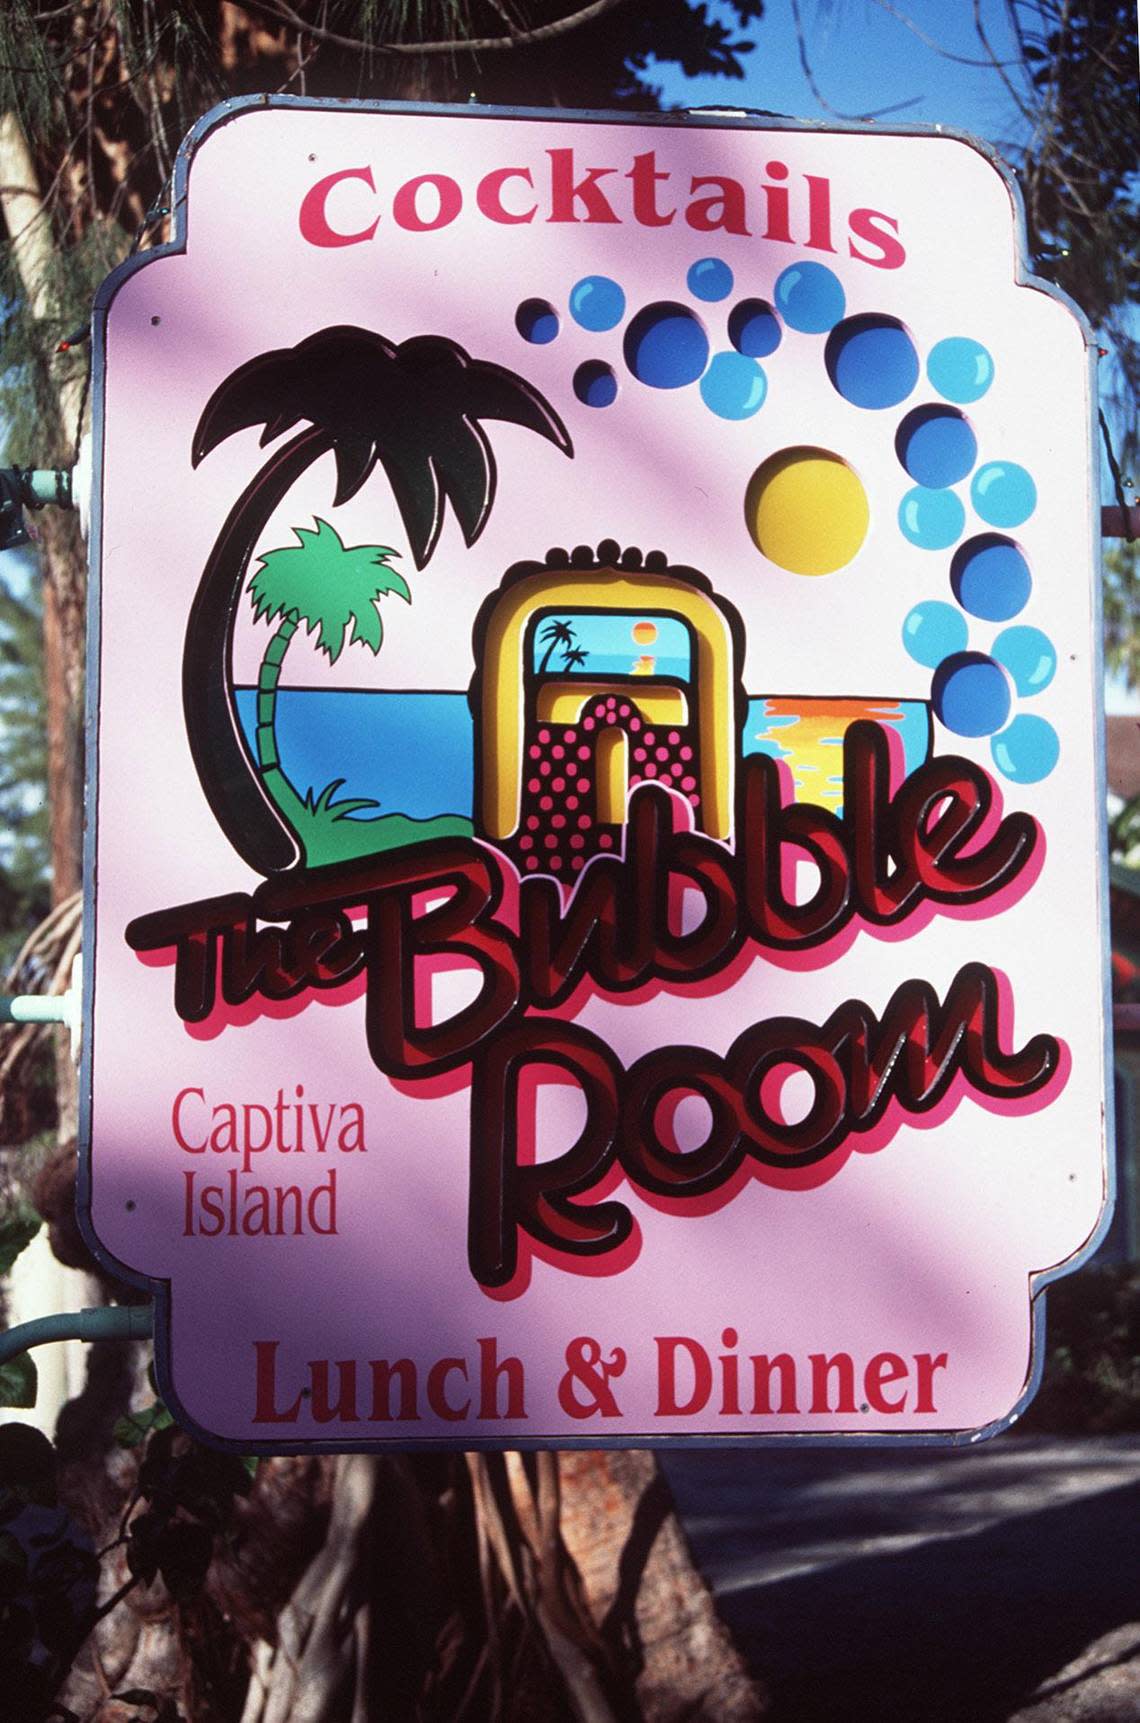 The Bubble Room’s sign in Captiva on 15001 Captiva Dr. in Florida from Oct. 24, 2000.